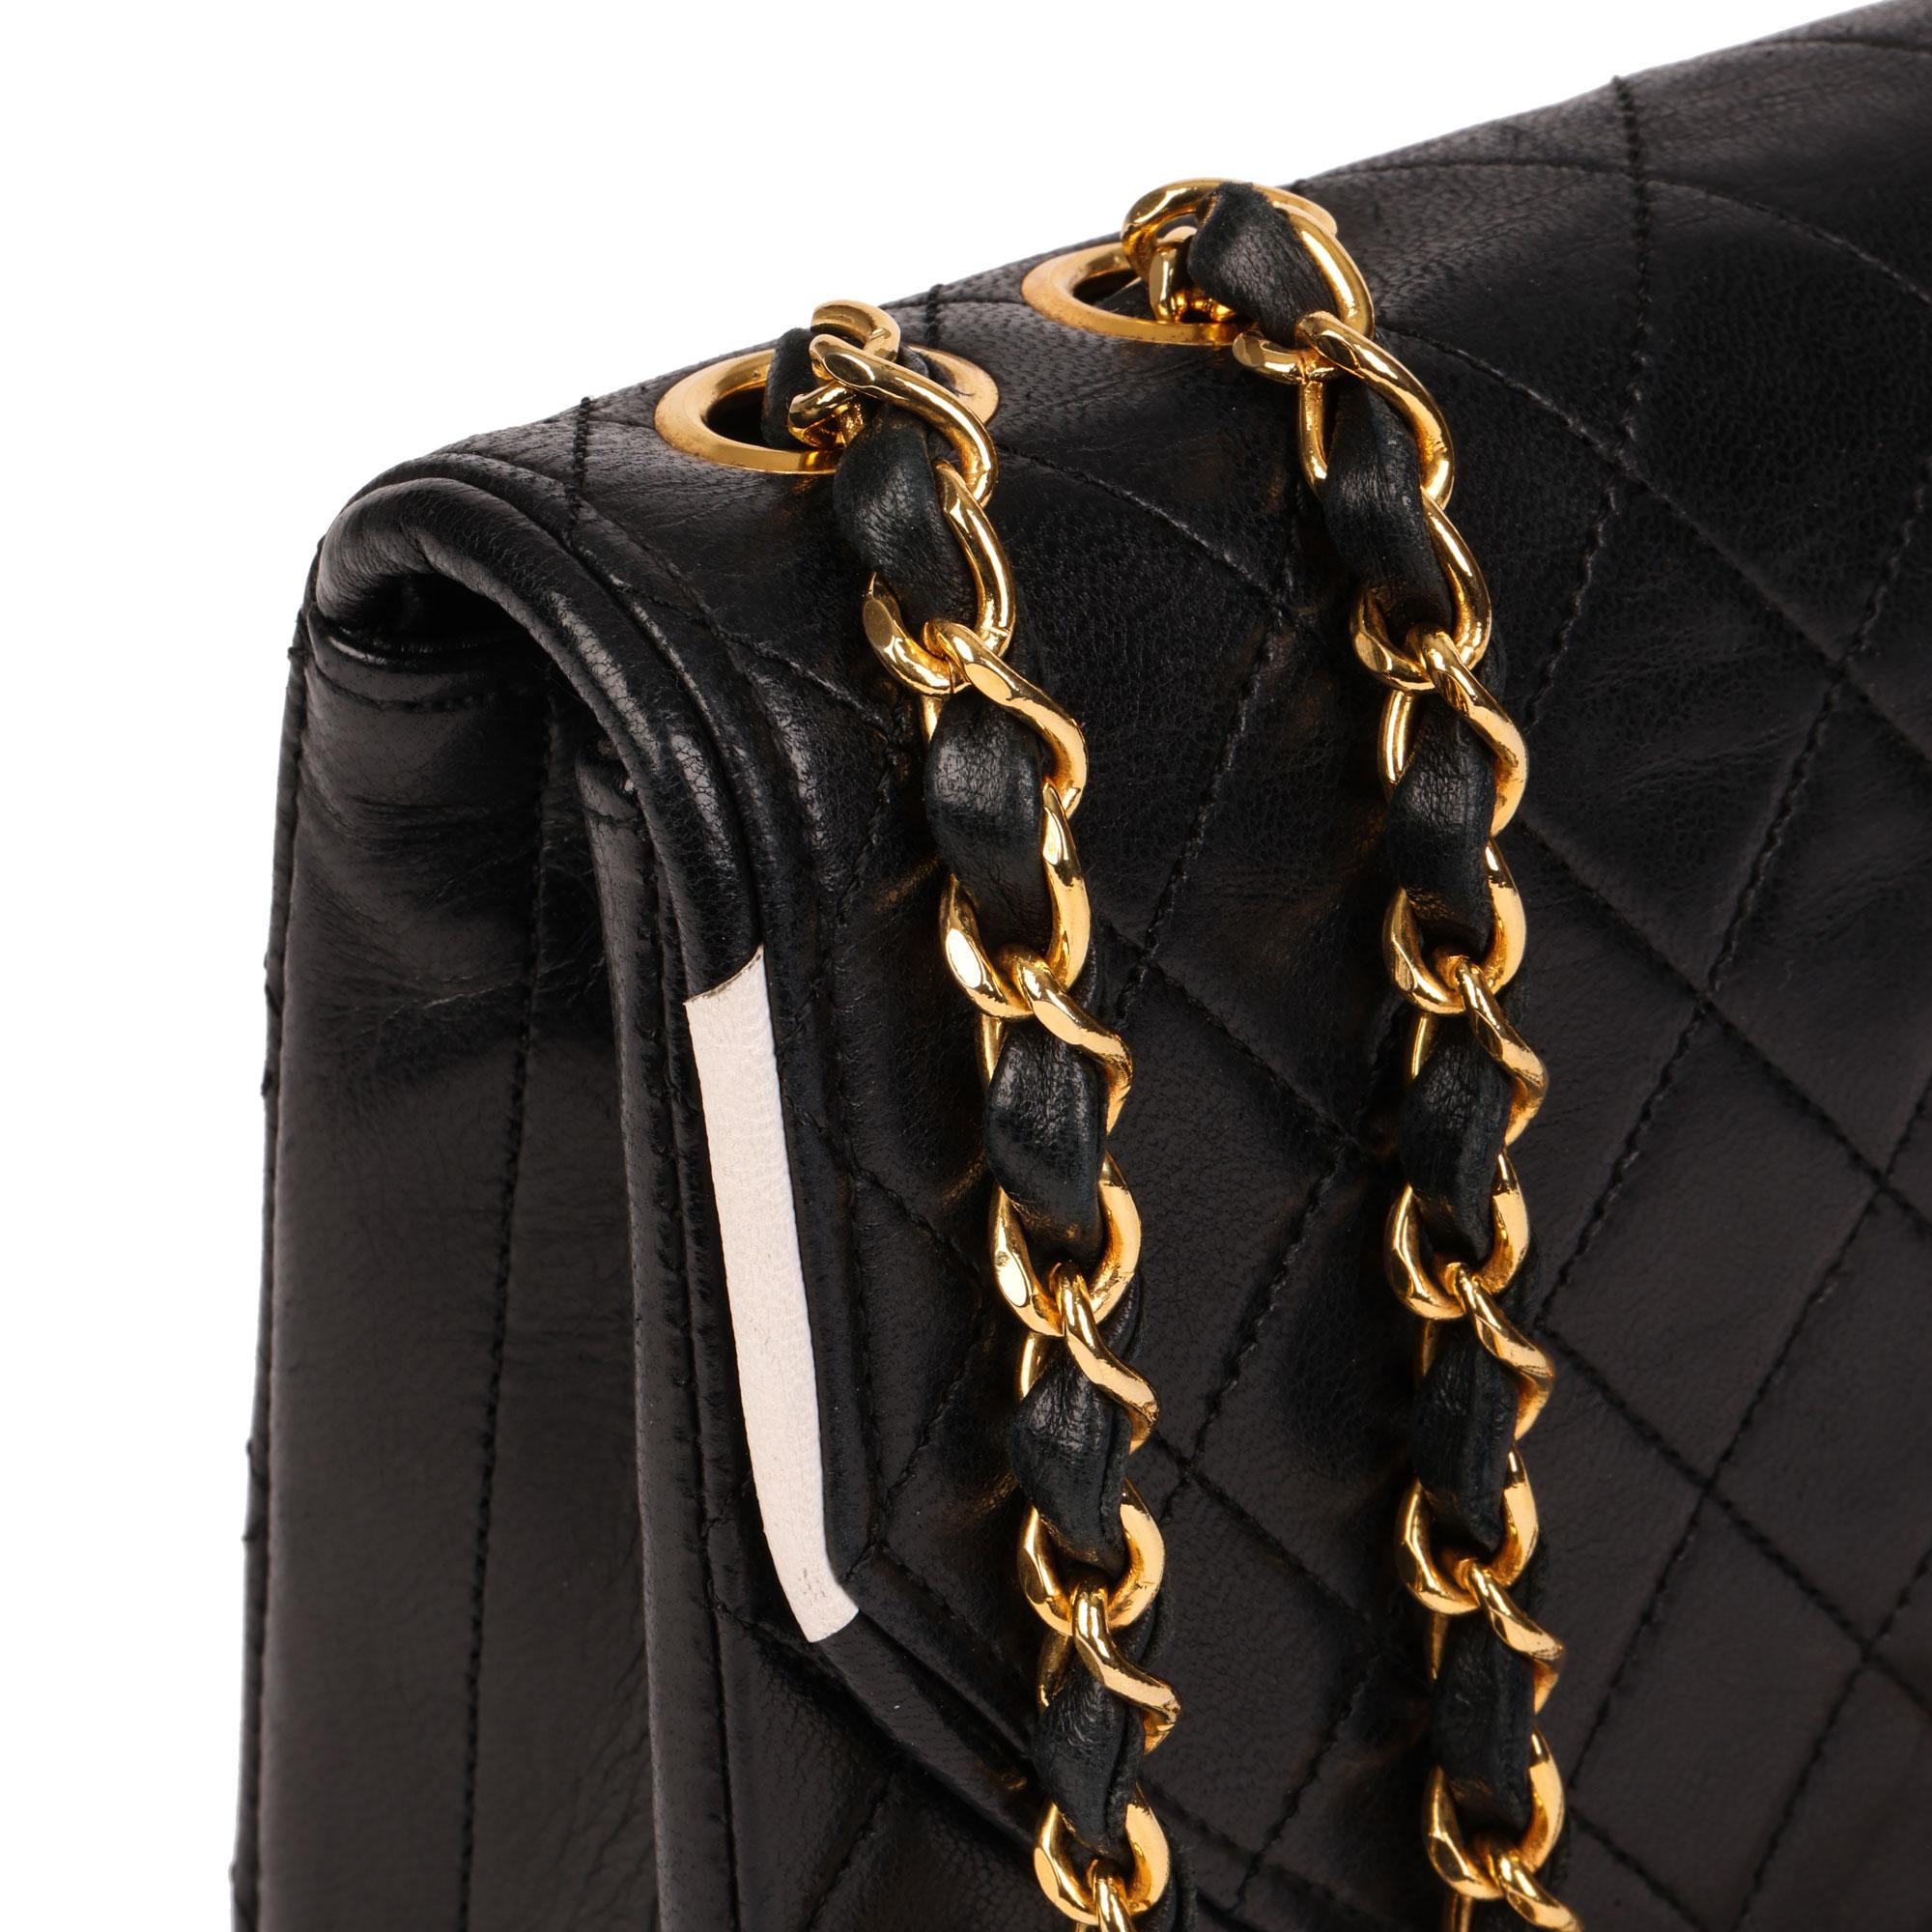 CHANEL
Black Quilted Lambskin Vintage Small Classic Single Flap Bag with White Trim

Xupes Reference: HB4085
Serial Number: 0259127
Age (Circa): 1988
Accompanied By: Chanel Dust Bag, Authenticity Card
Authenticity Details: Authenticity Card, Serial